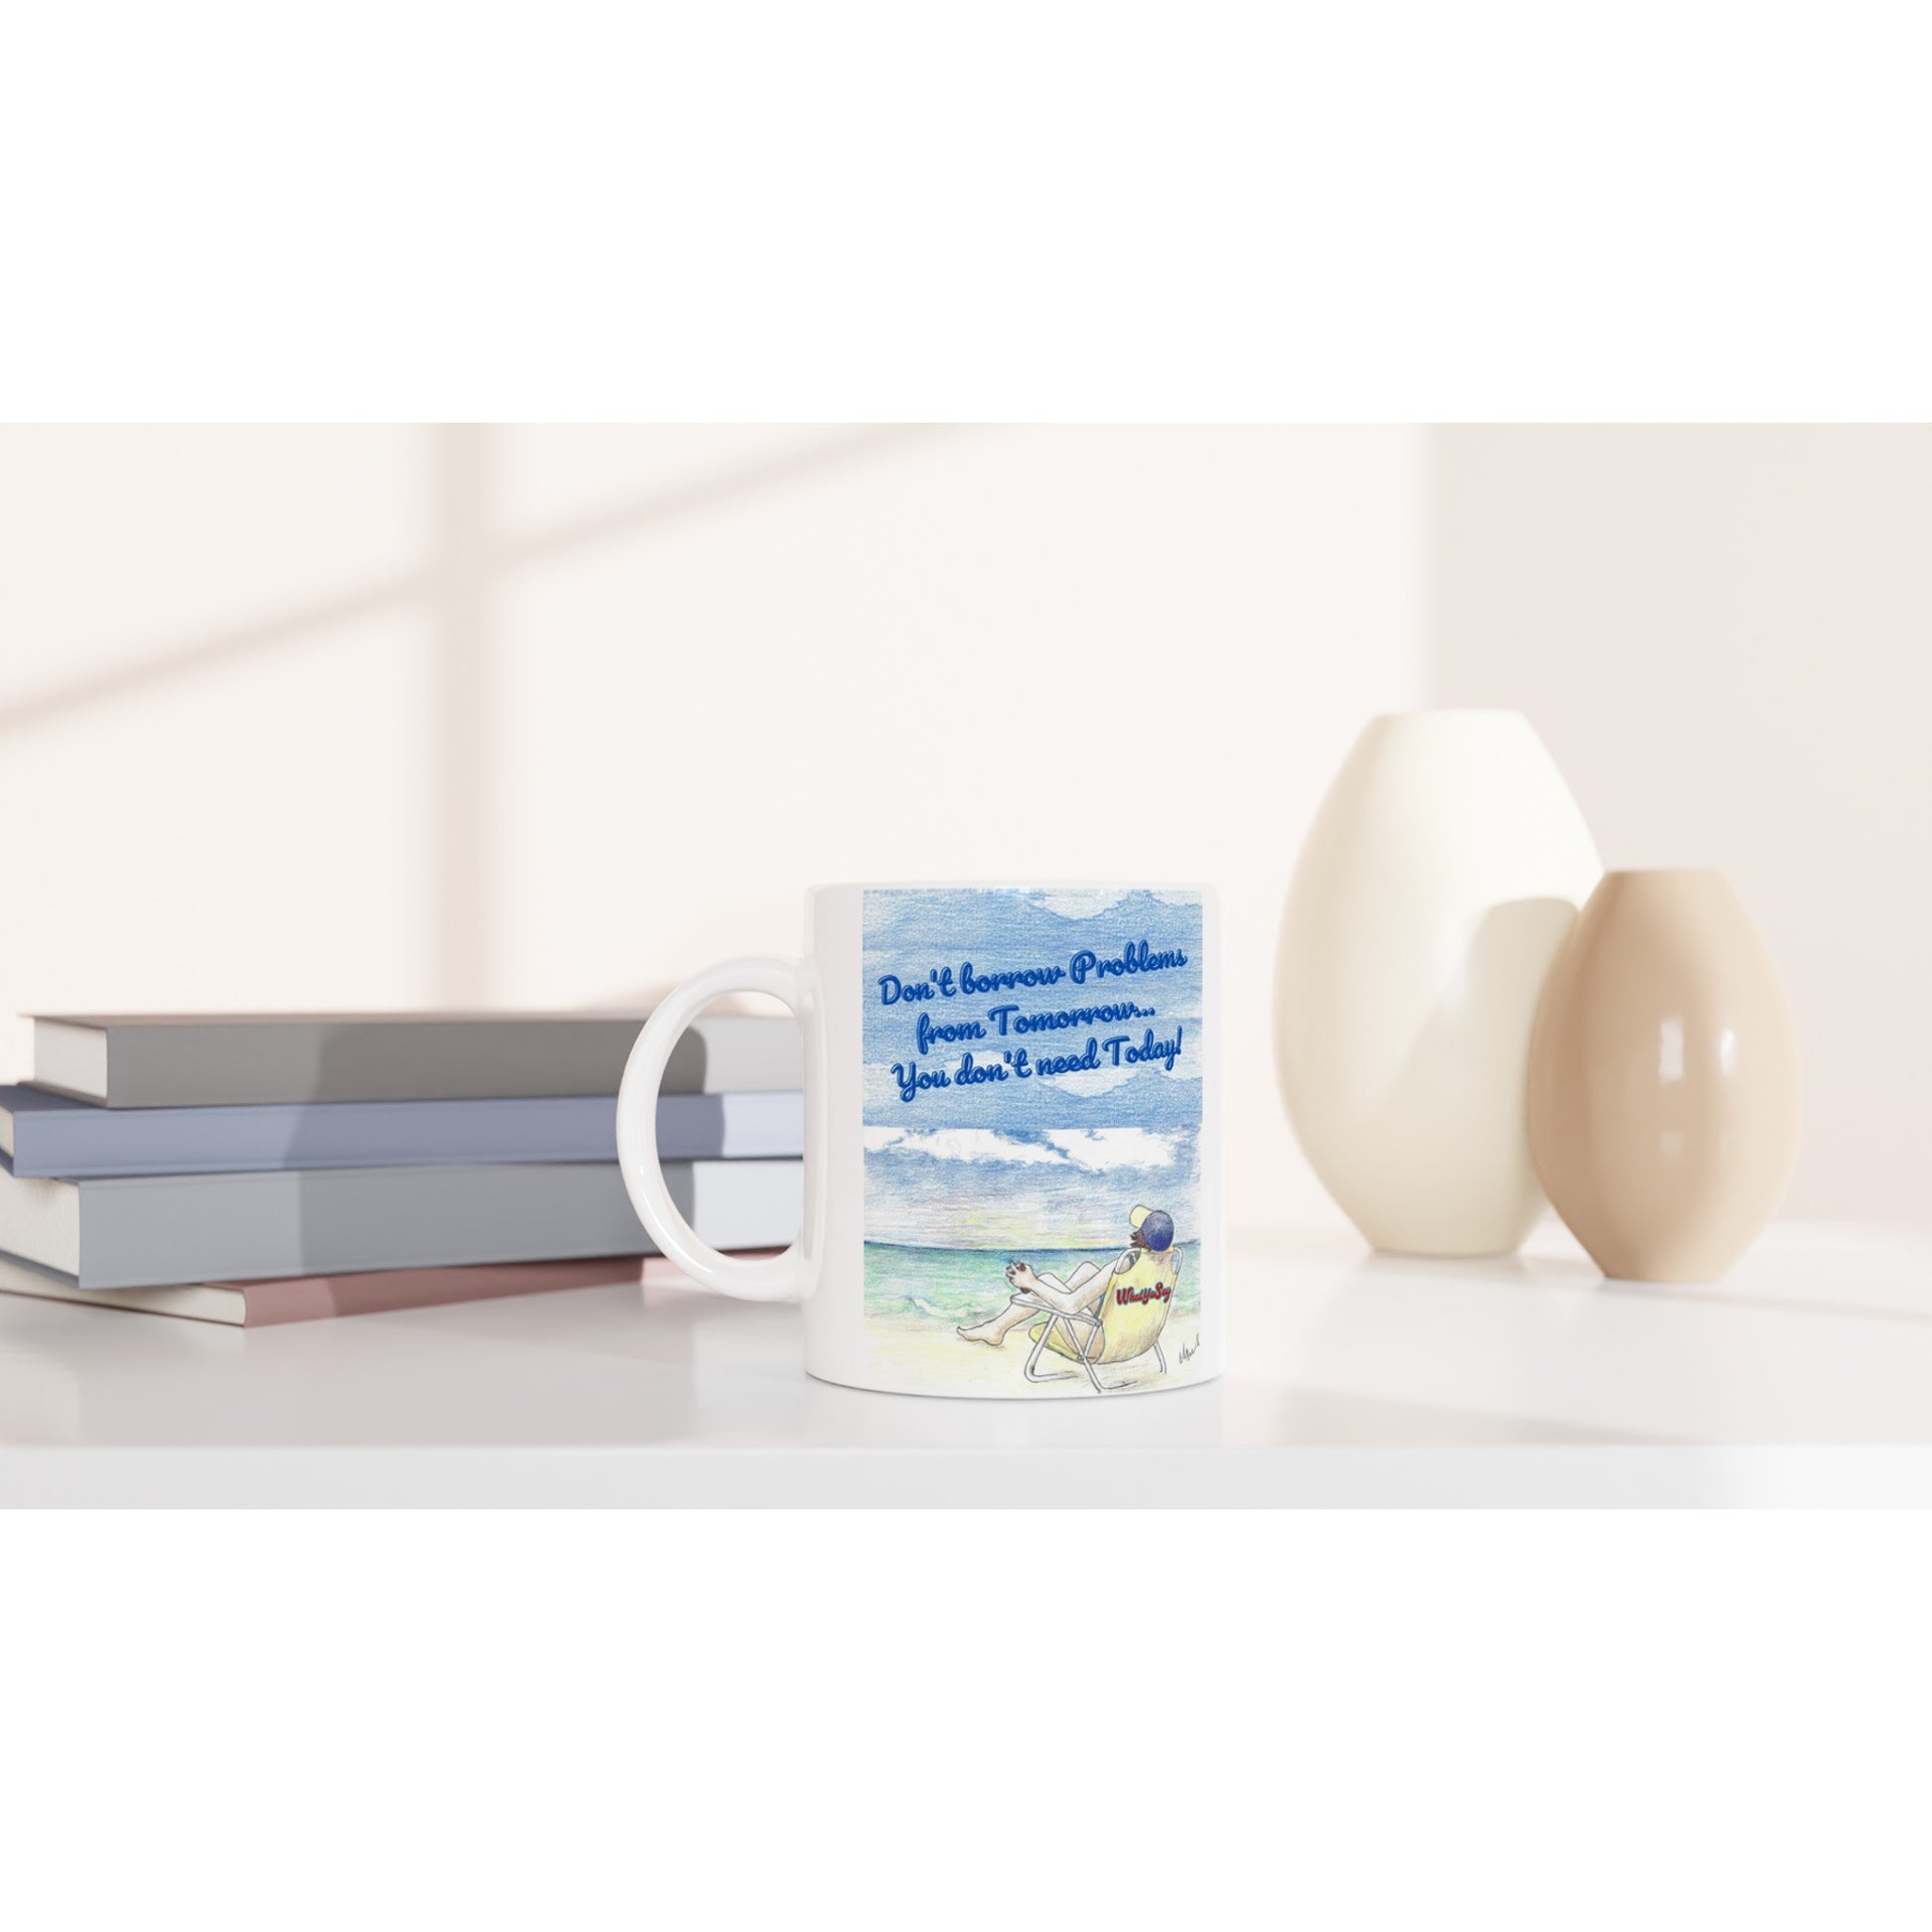 A white ceramic 11oz mug with motto funny saying Don't borrow Problems from Tomorrow... You don't need Today! on front and WhatYa Say logo on back dishwasher and microwave safe from WhatYa Say Apparel sitting on coffee table with books and two vases.